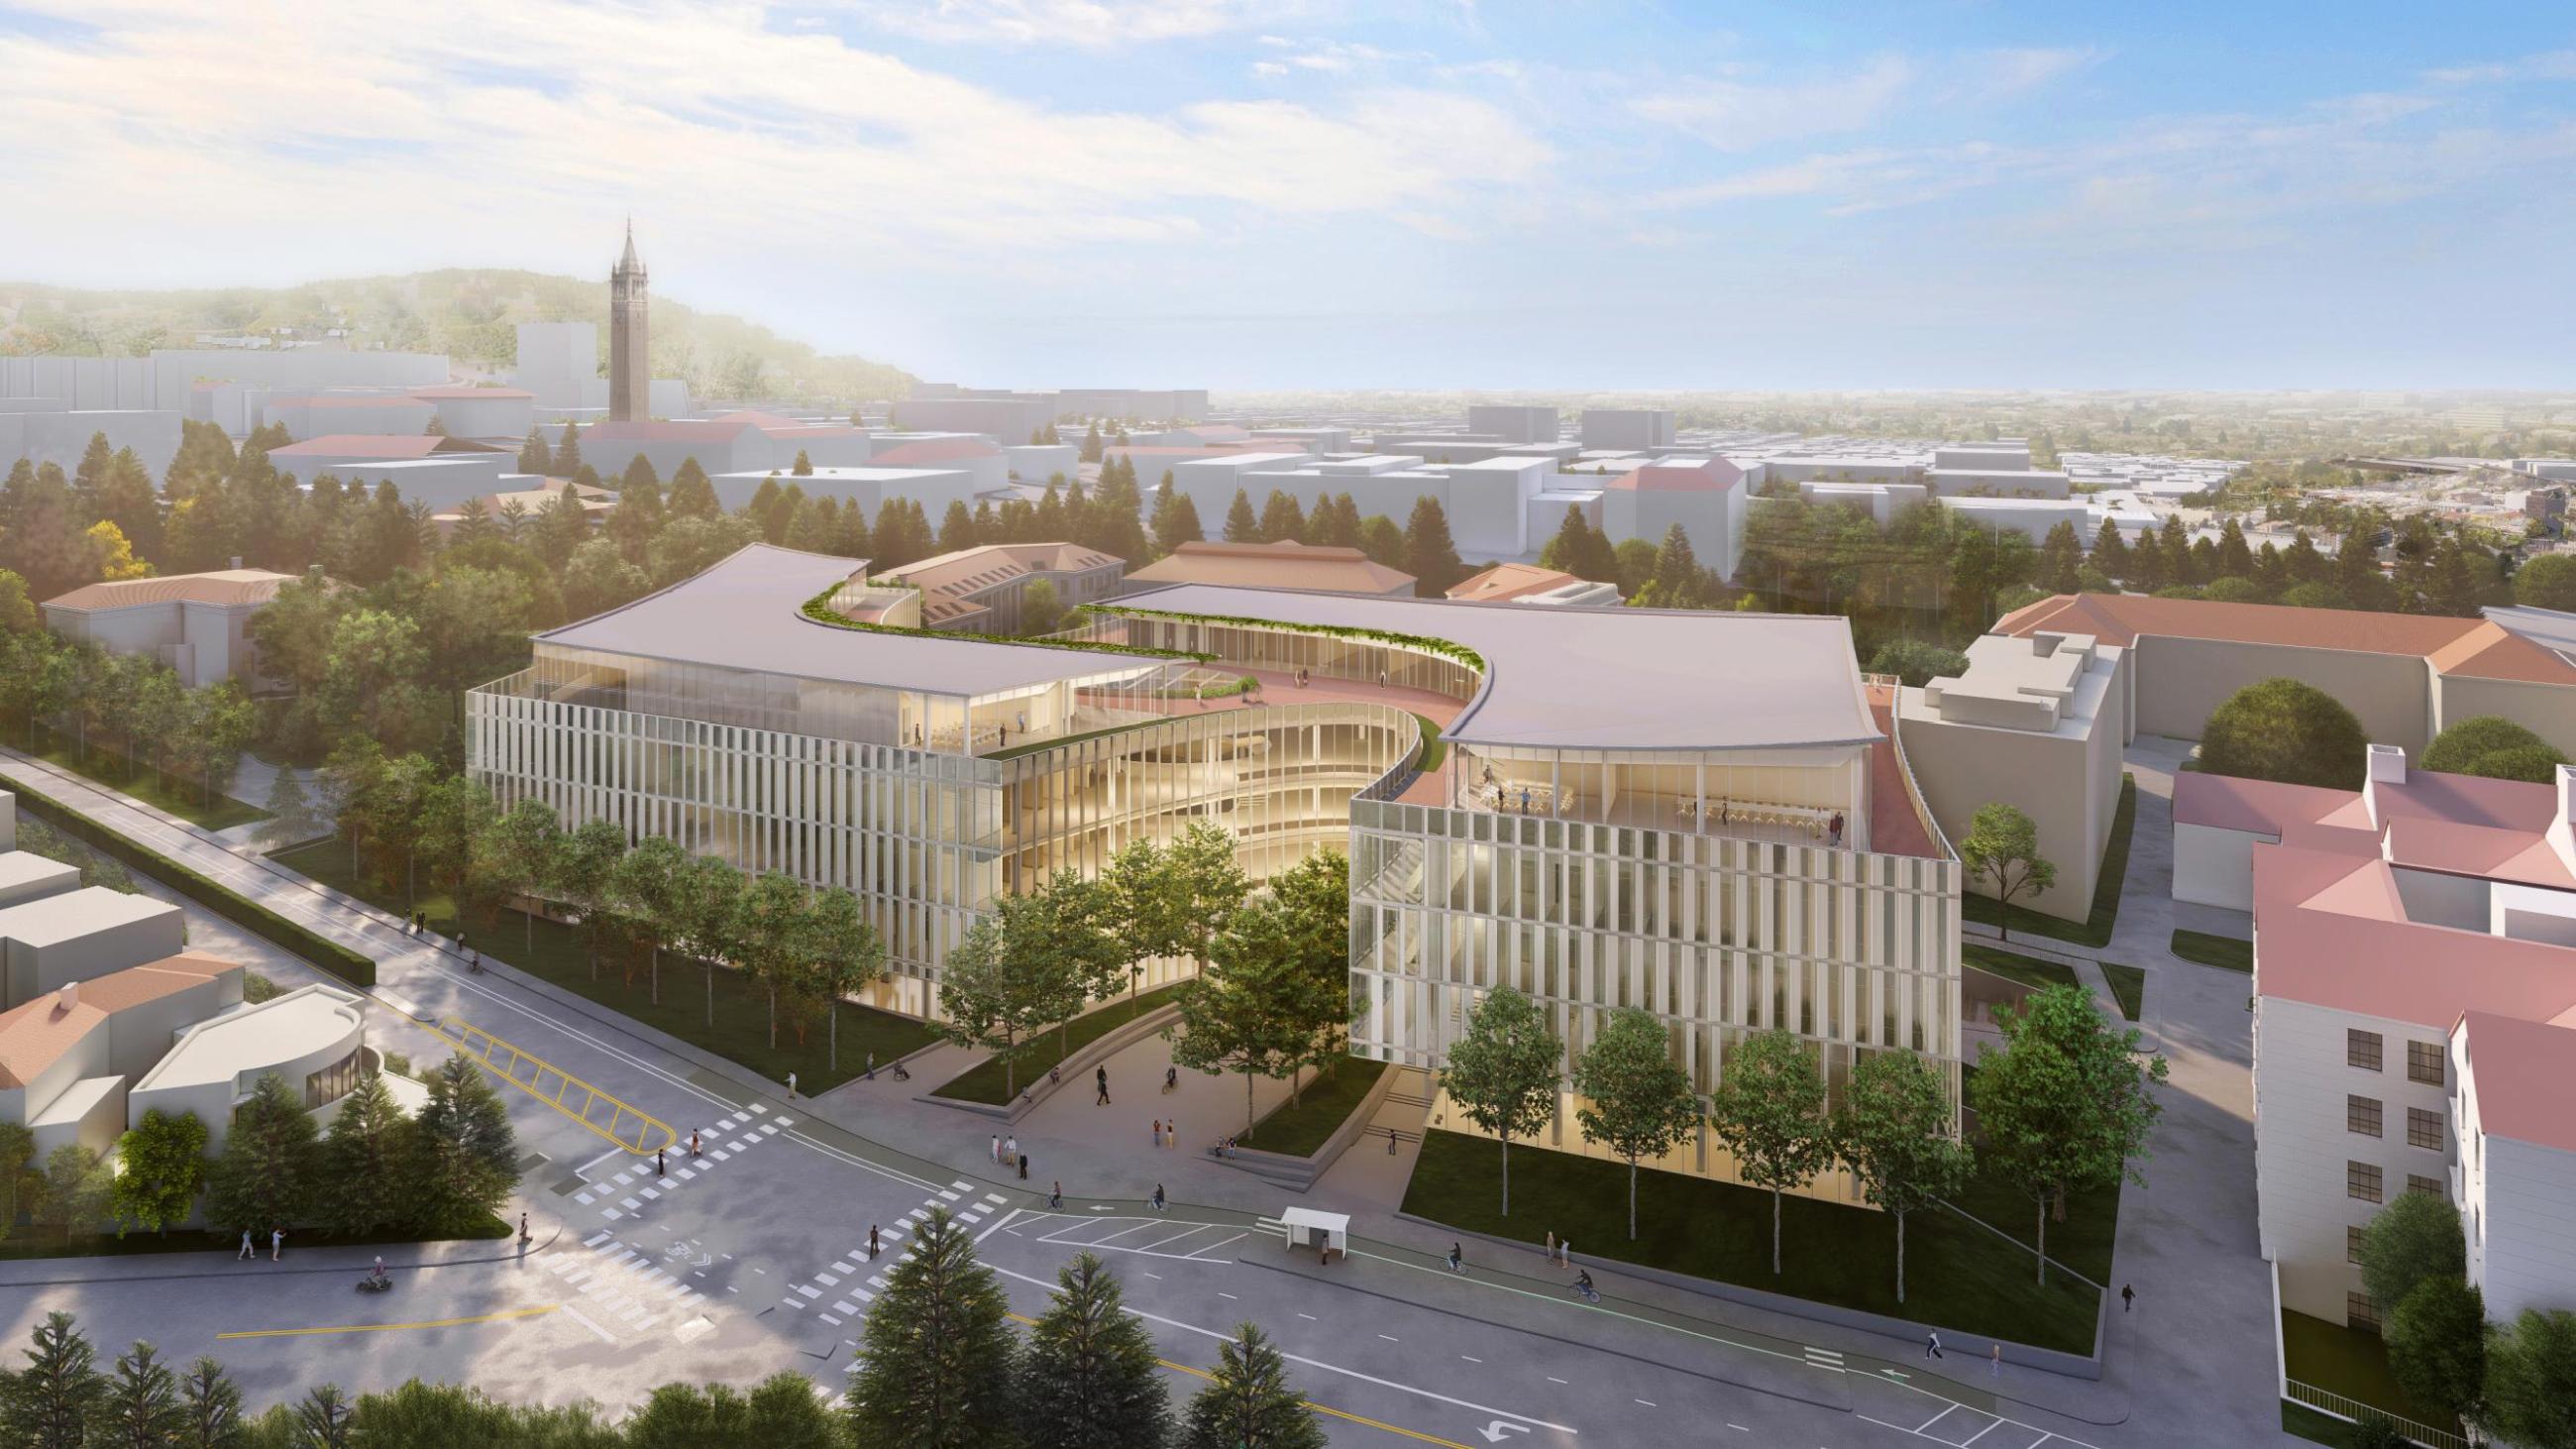 The Gateway building will be located on the UC Berkeley campus at the intersection of Hearst Avenue and Arch Street. (Rendering by Weiss/Manfredi architecture firm)